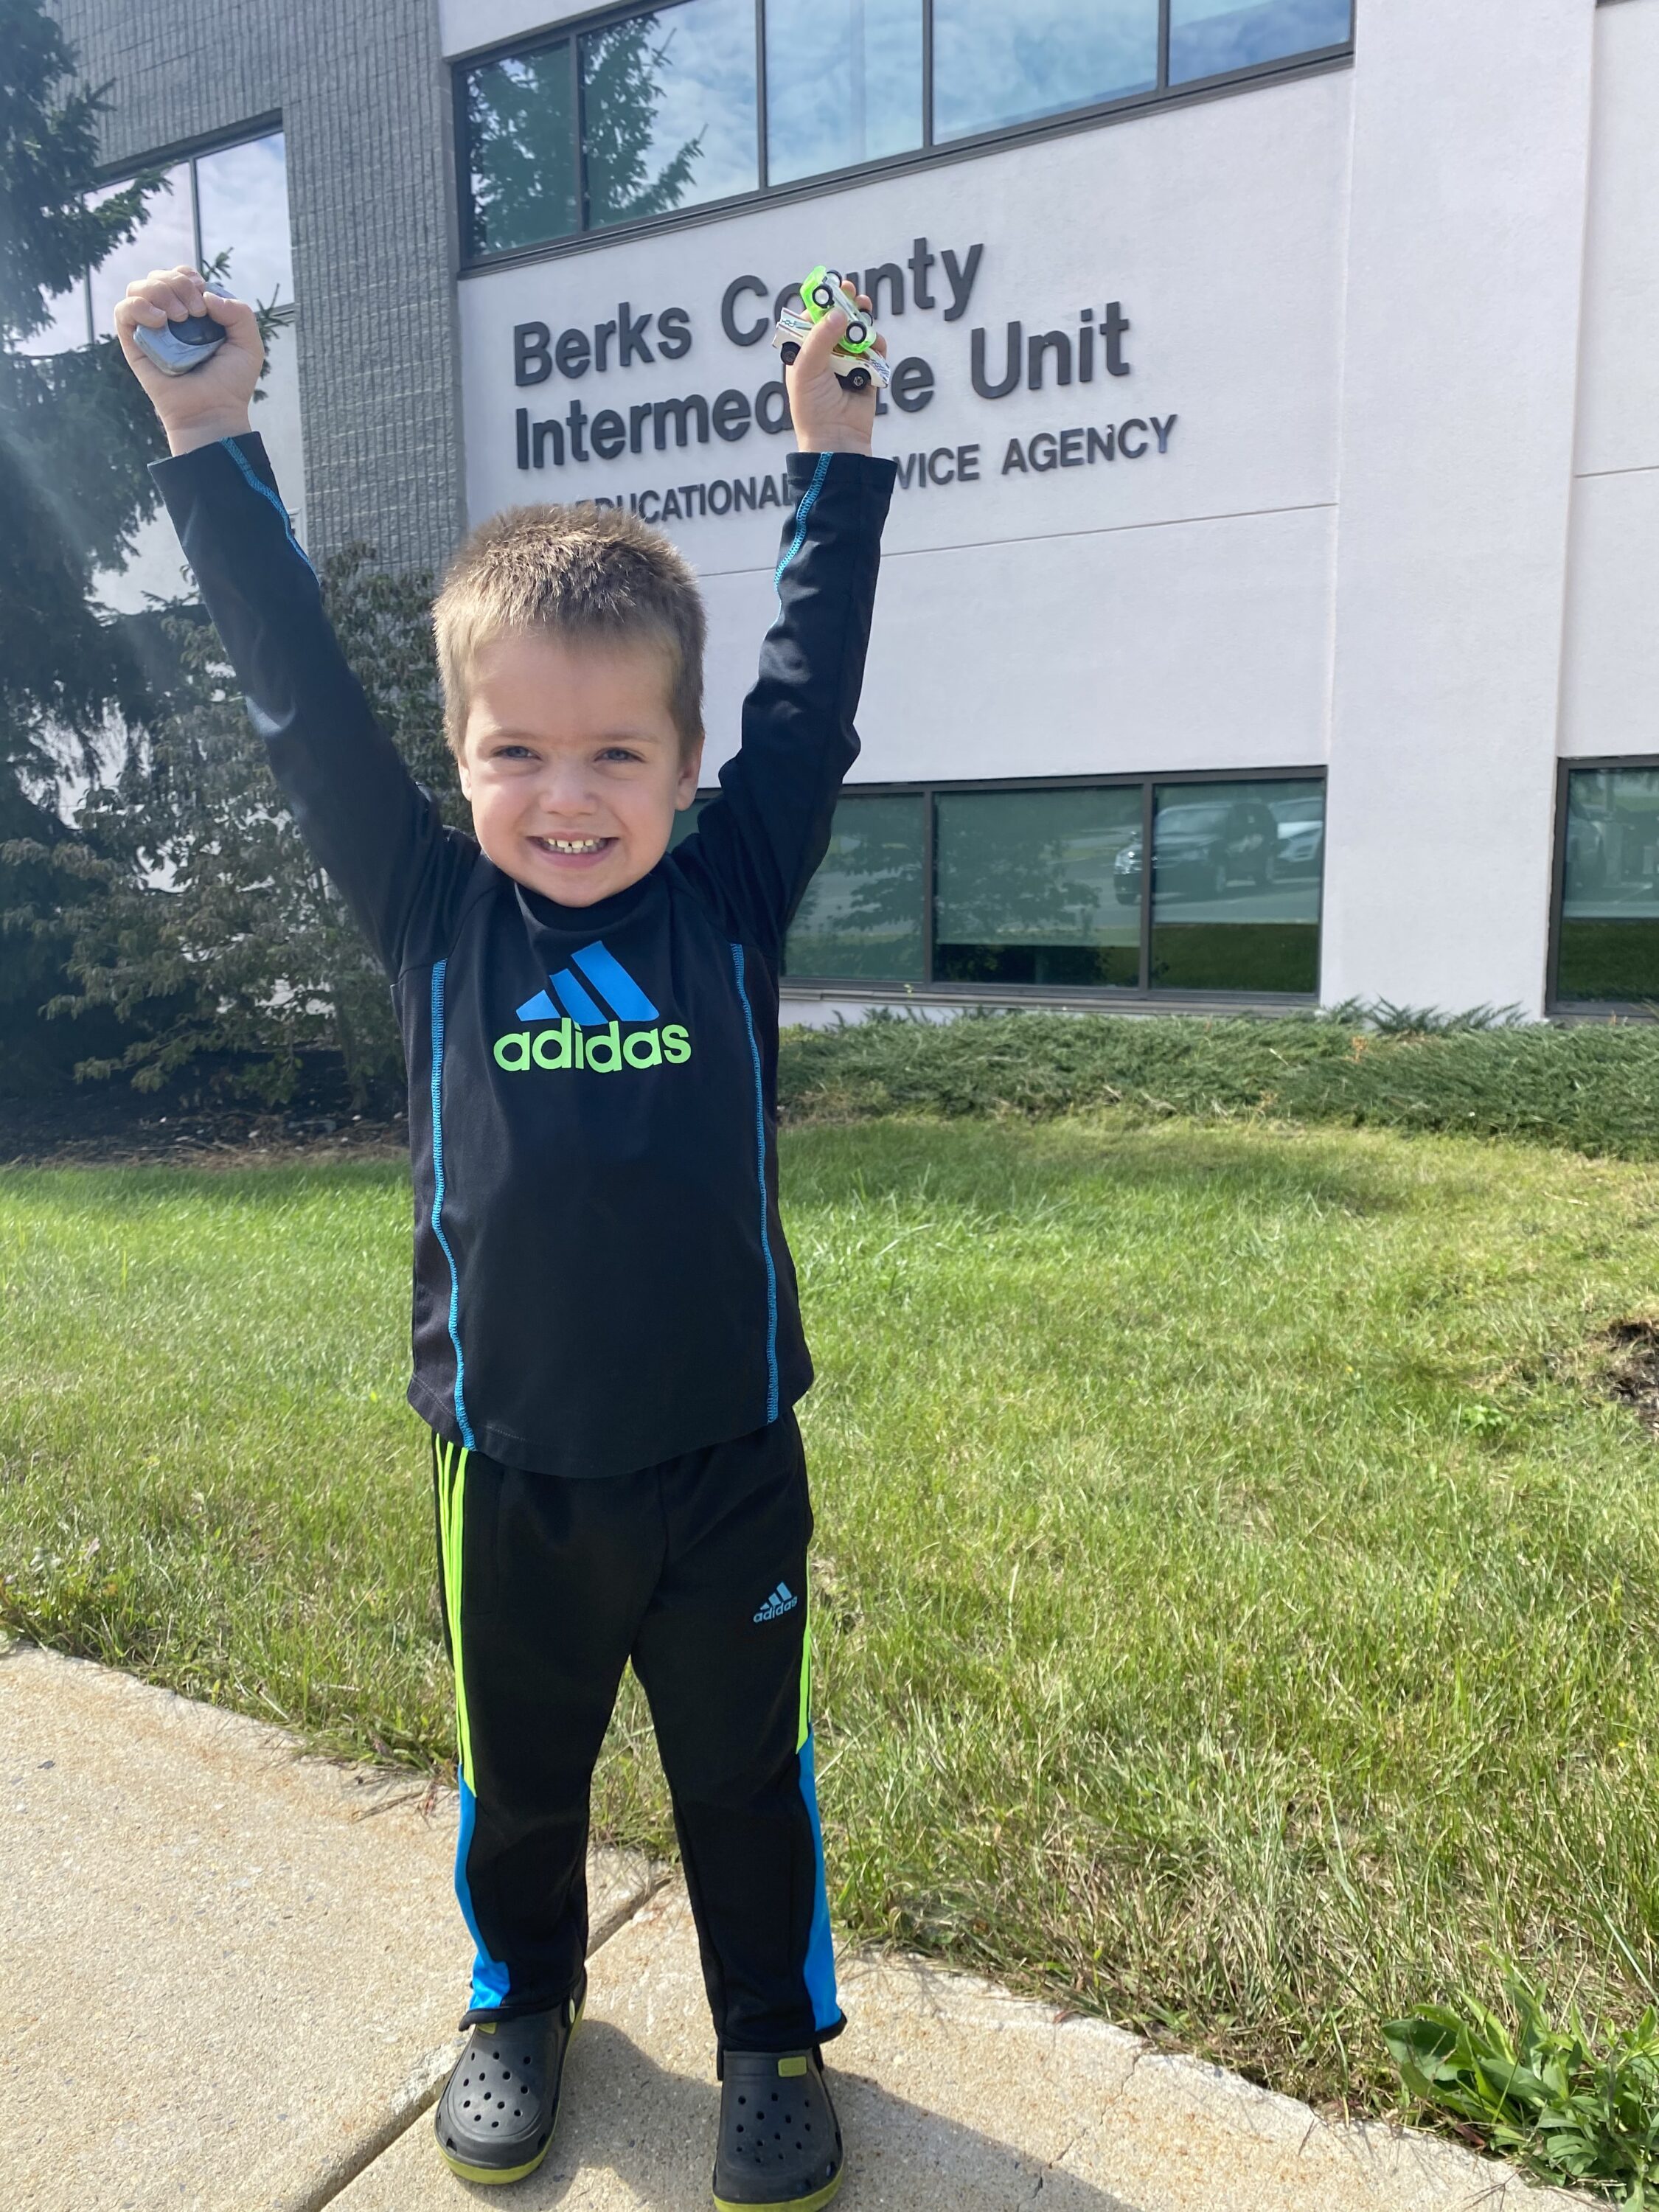 A young boy holding toy cars stands with arms raised in front of a building with the words Berks county Intermediate Unit under the window.